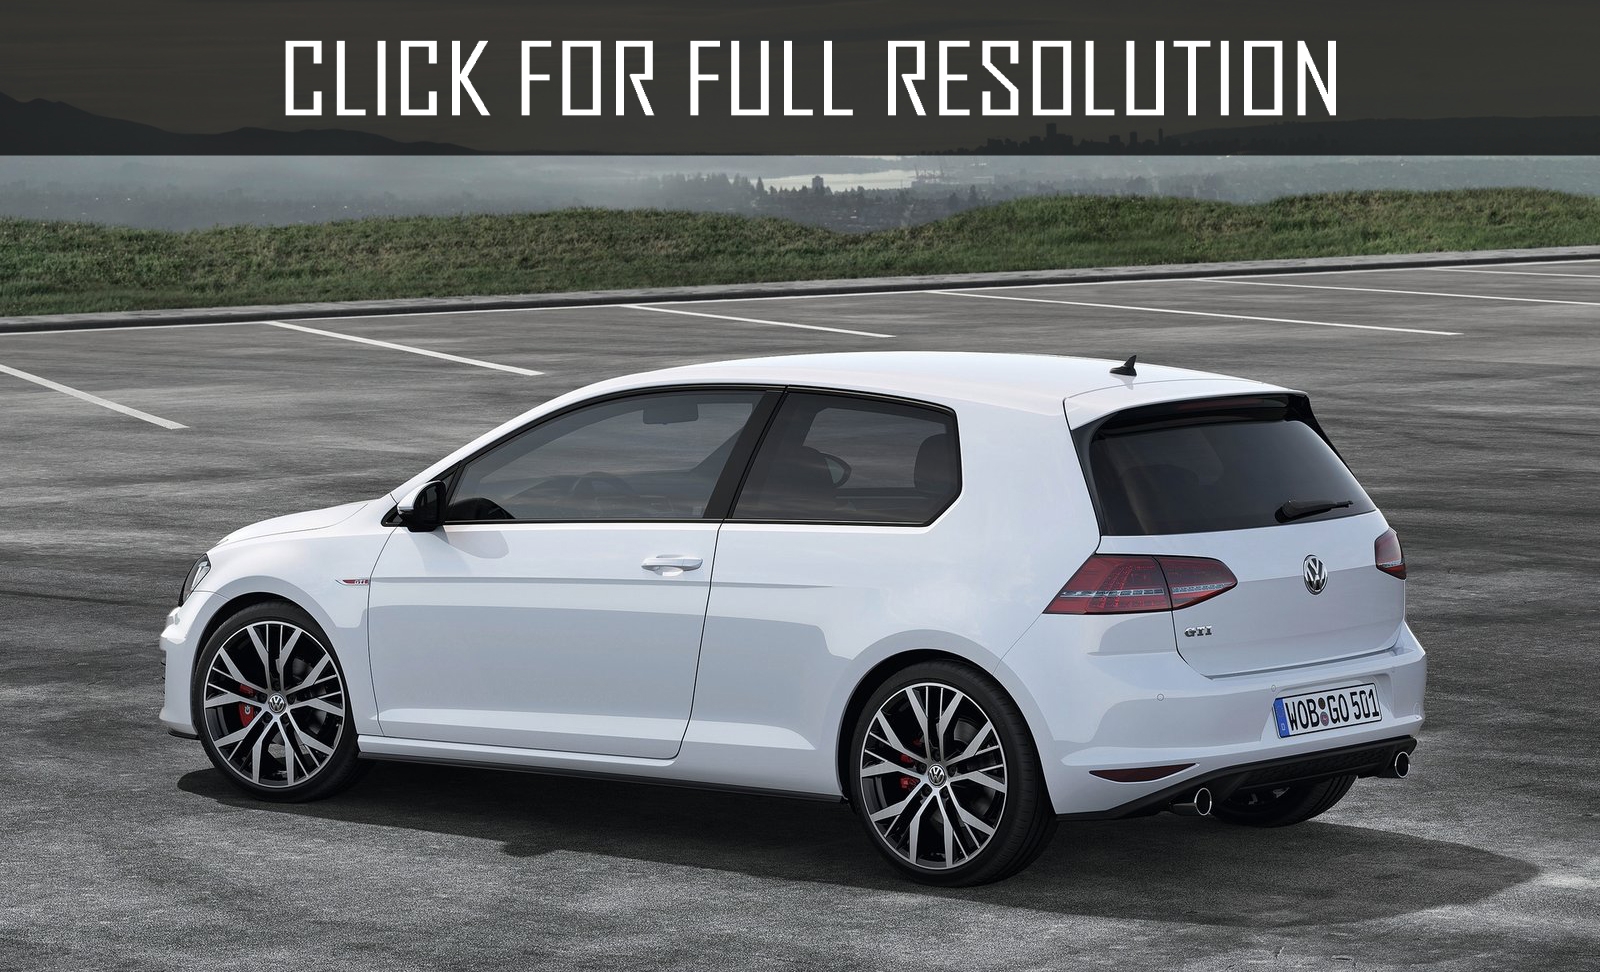 Volkswagen Golf 7 Gti - amazing photo gallery, some information and ...